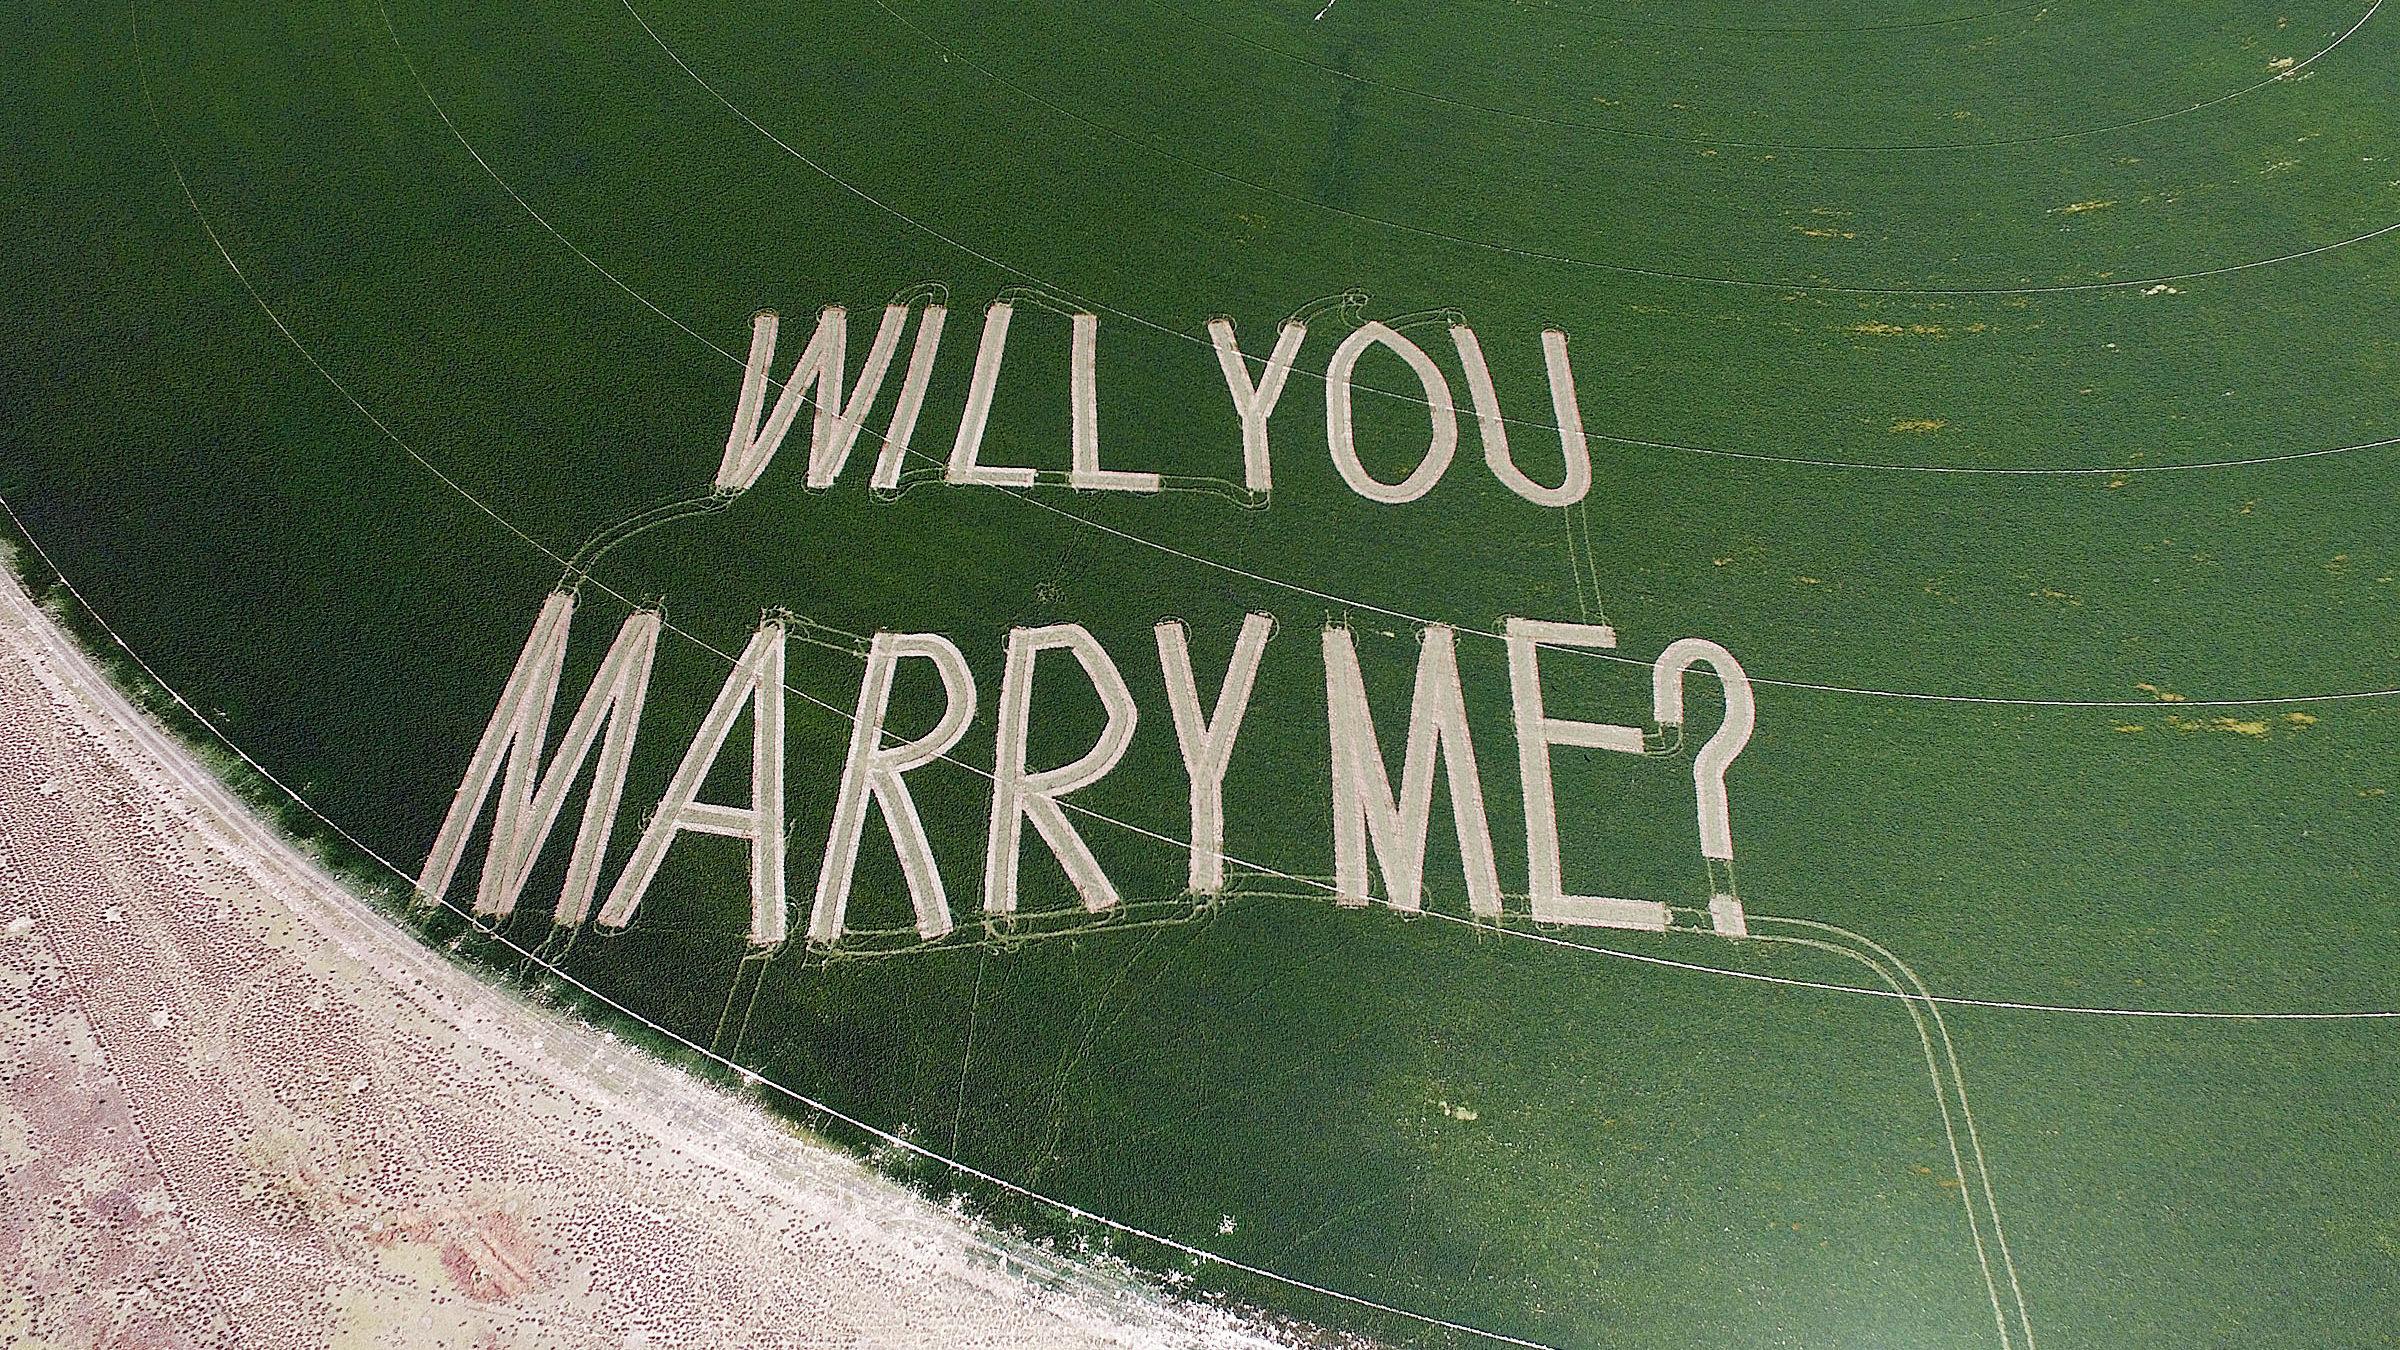 Tanner Holt used a swather to cut "Will you marry me?" into a large hayfield at his family's ranch ...